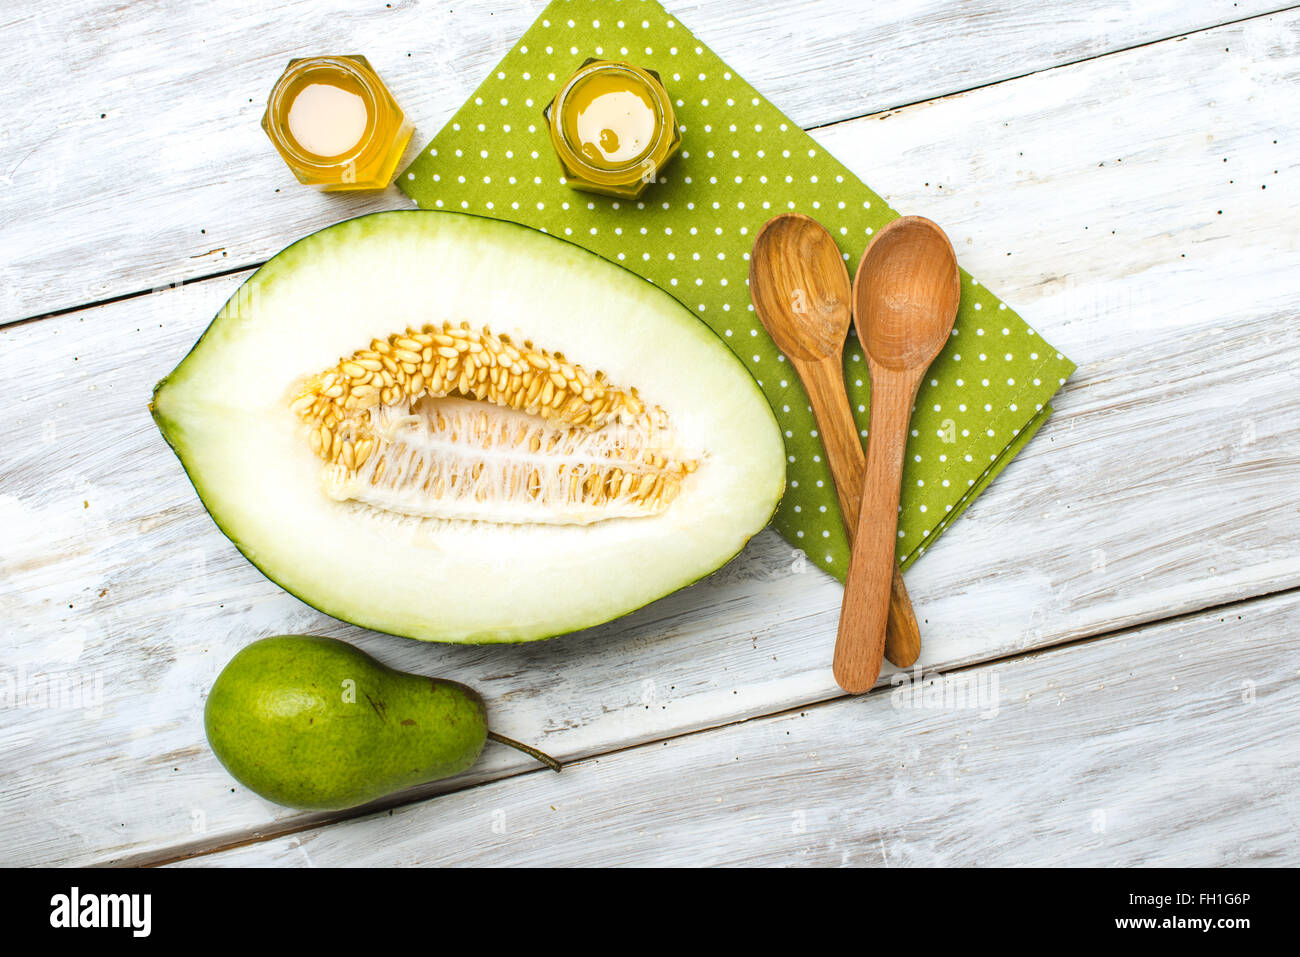 Cut melon honey and green pear on wooden board in rustic style Stock Photo